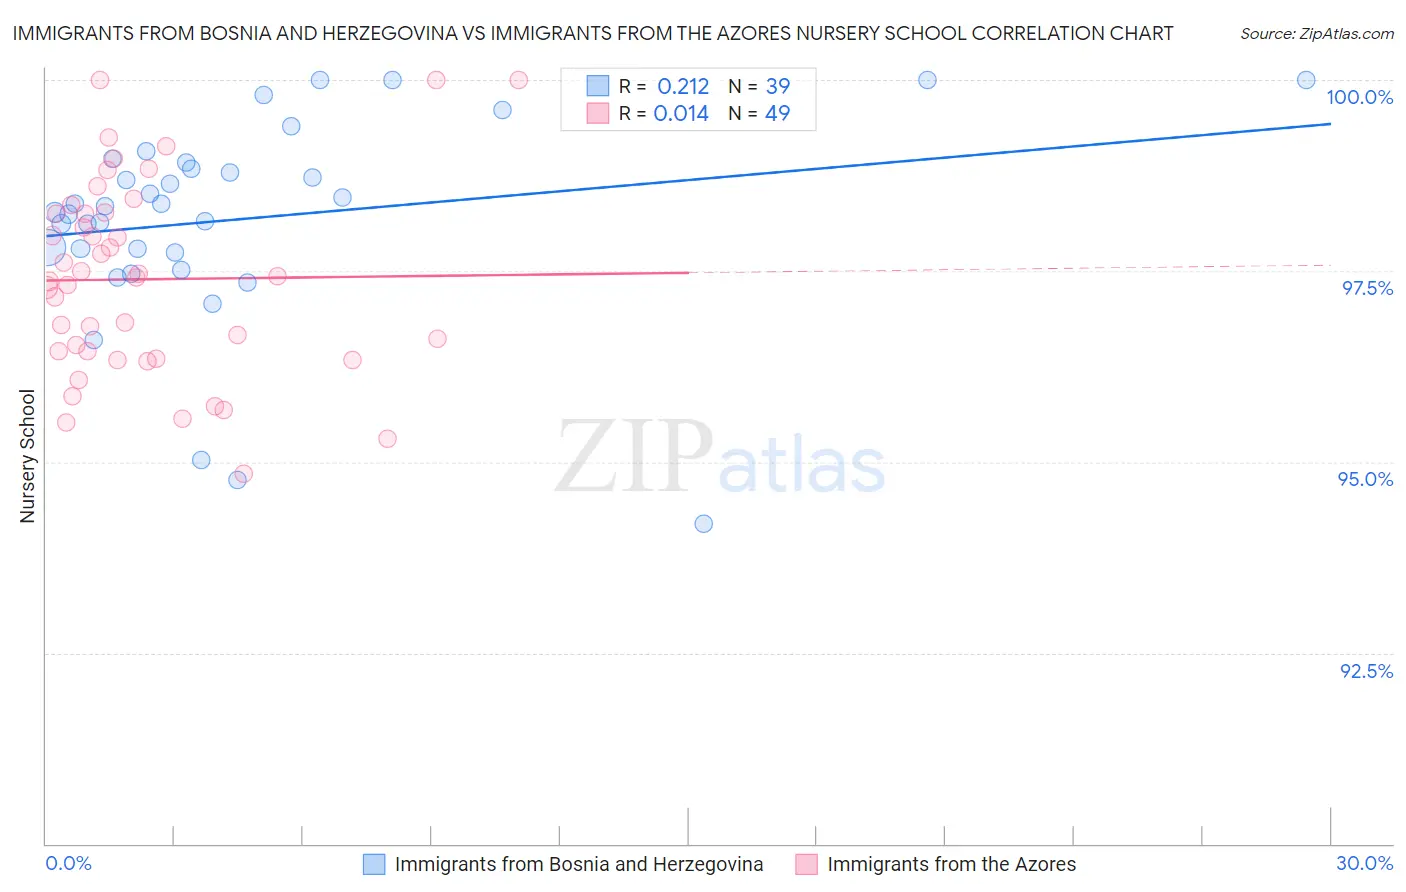 Immigrants from Bosnia and Herzegovina vs Immigrants from the Azores Nursery School